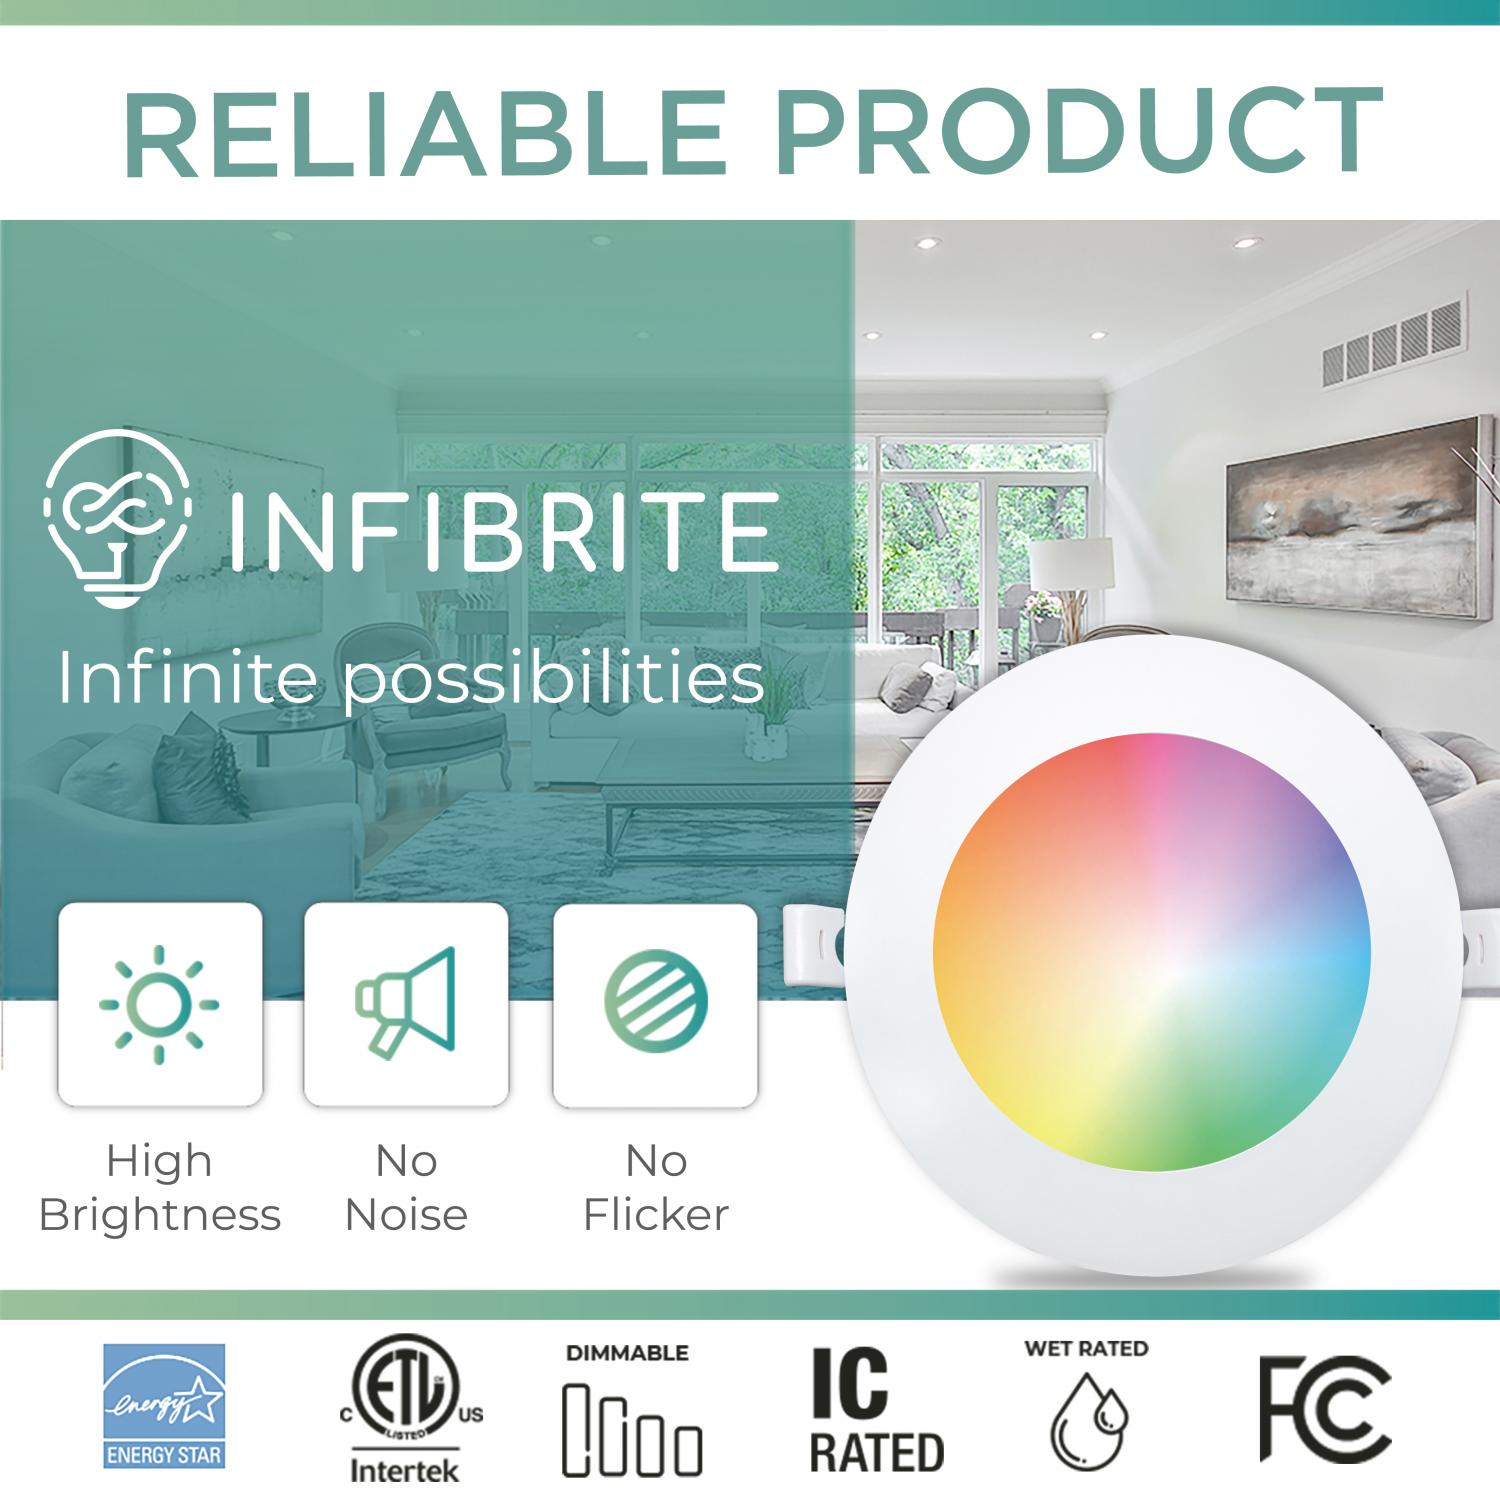 Infibrite 6 Inch Wifi Smart Ultra-Slim LED Ceiling Mount Recessed Light 12W 1100LM Dimmable Retrofit with Junction Box, Easy Install, App & Voice Control, Alexa/Google Compatible, ETL & Energy Star, Wet Rated (12 Pack)